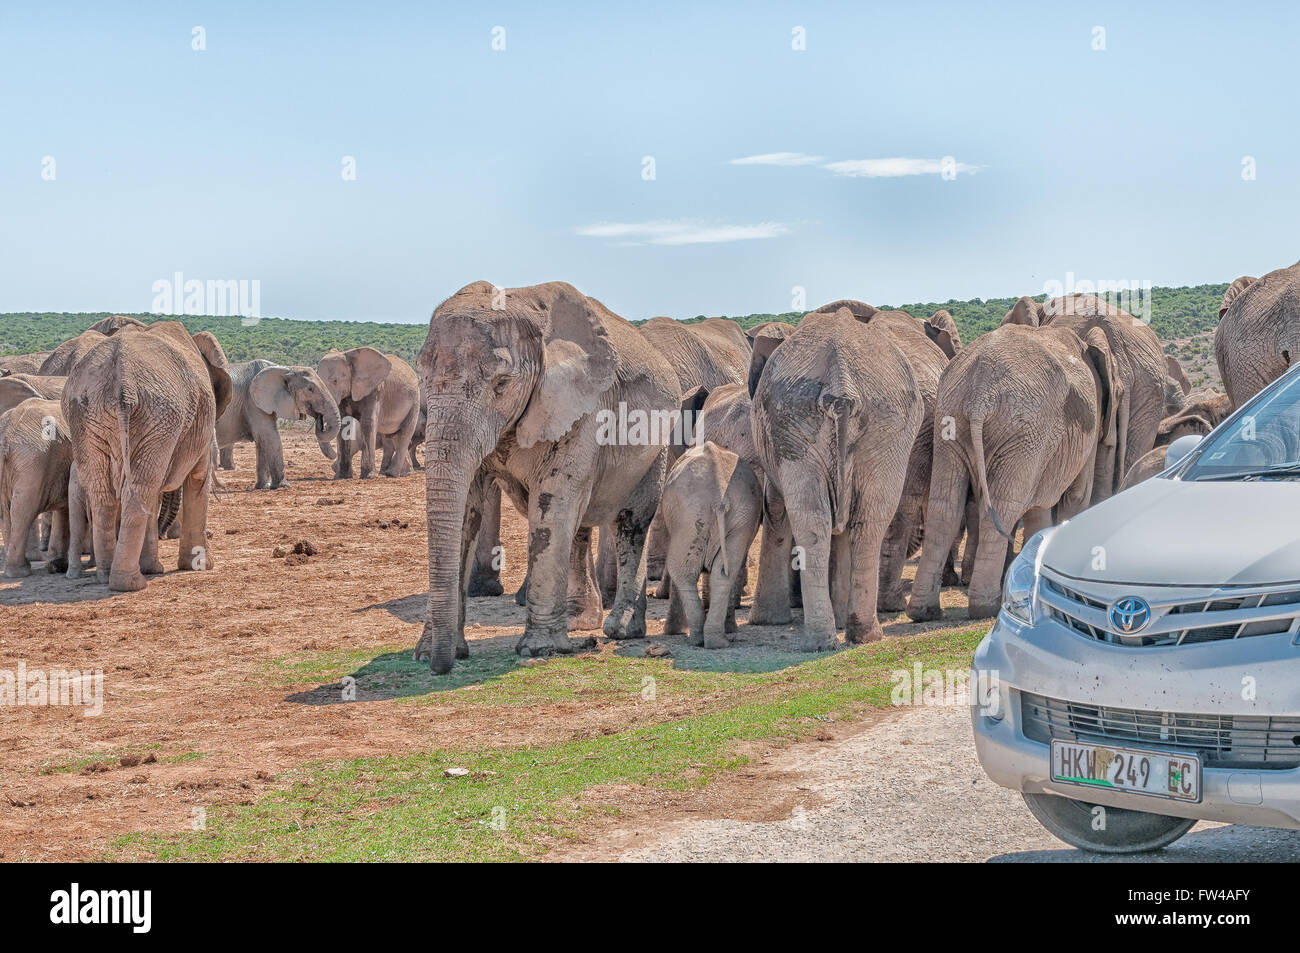 ADDO ELEPHANT NATIONAL PARK, SOUTH AFRICA - FEBRUARY 23, 2016: A large group of mud colored elephants waiting to cross the road Stock Photo